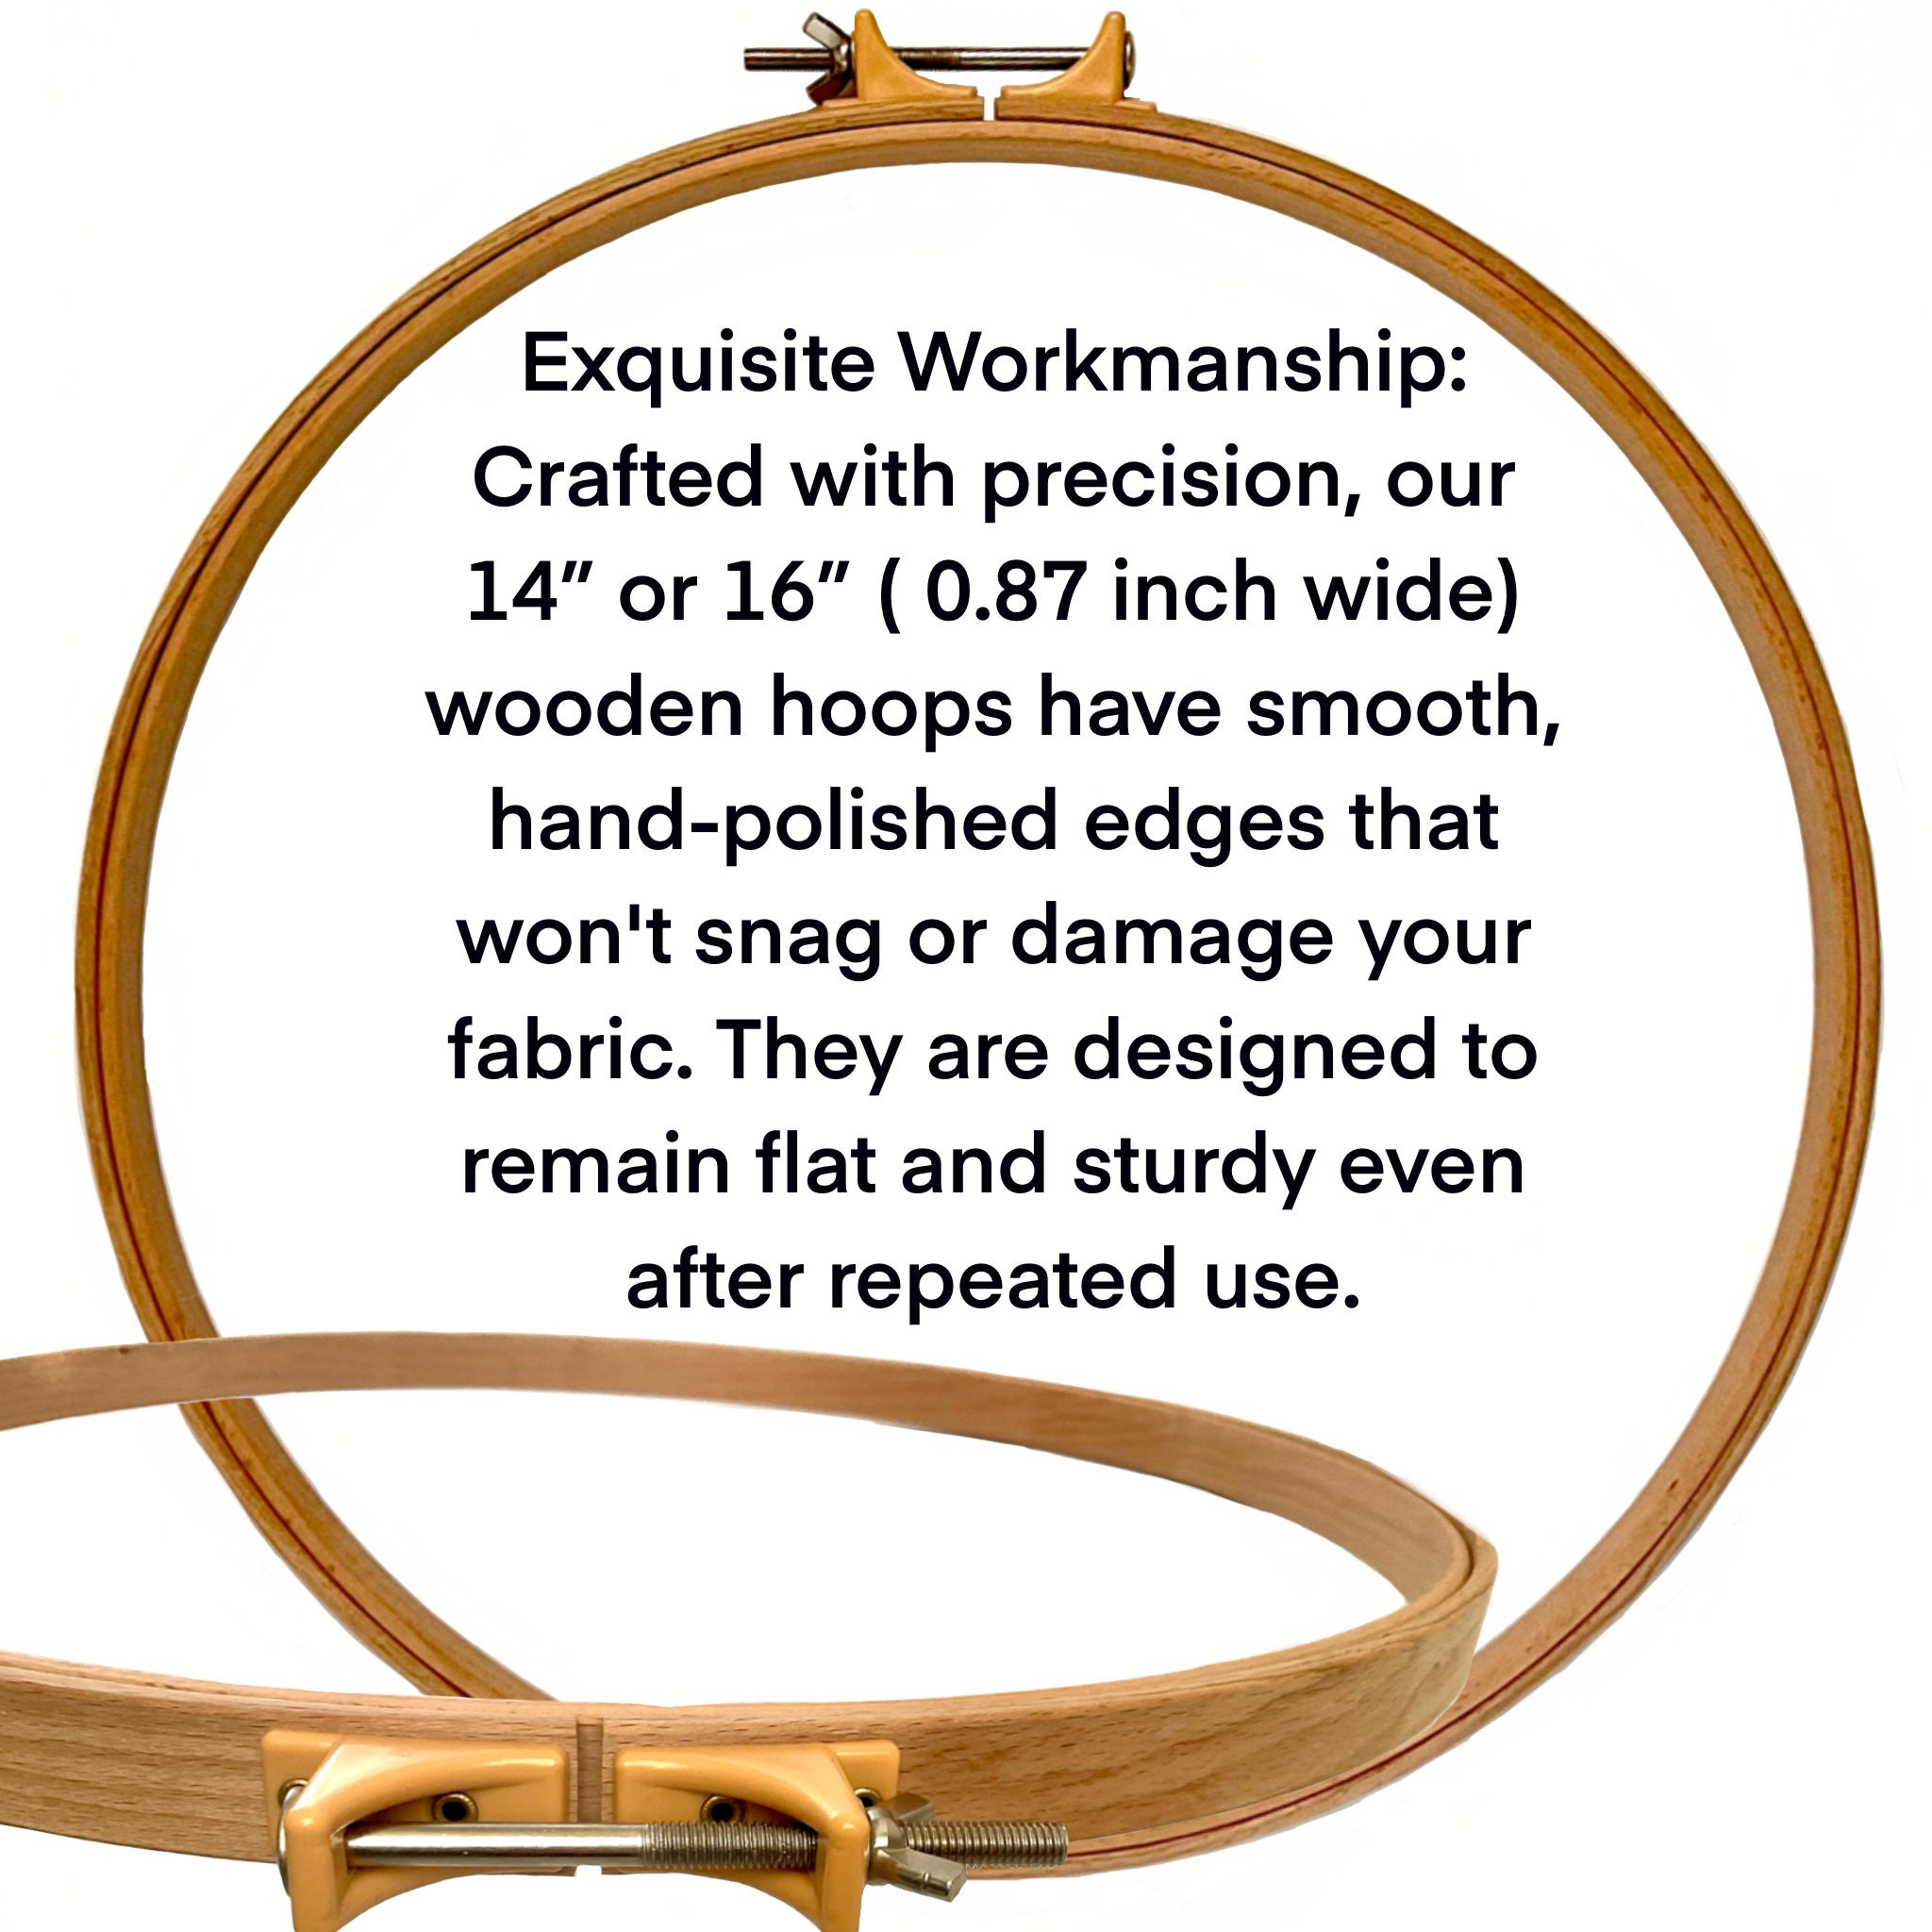  DutchCrafters Solid Oak Wood 22 Inch Round Extra Large Tilting Quilt  Hoop with Stand, Quilting Frame for Hand Quilting - Amish Made in America  (Medium Walnut)